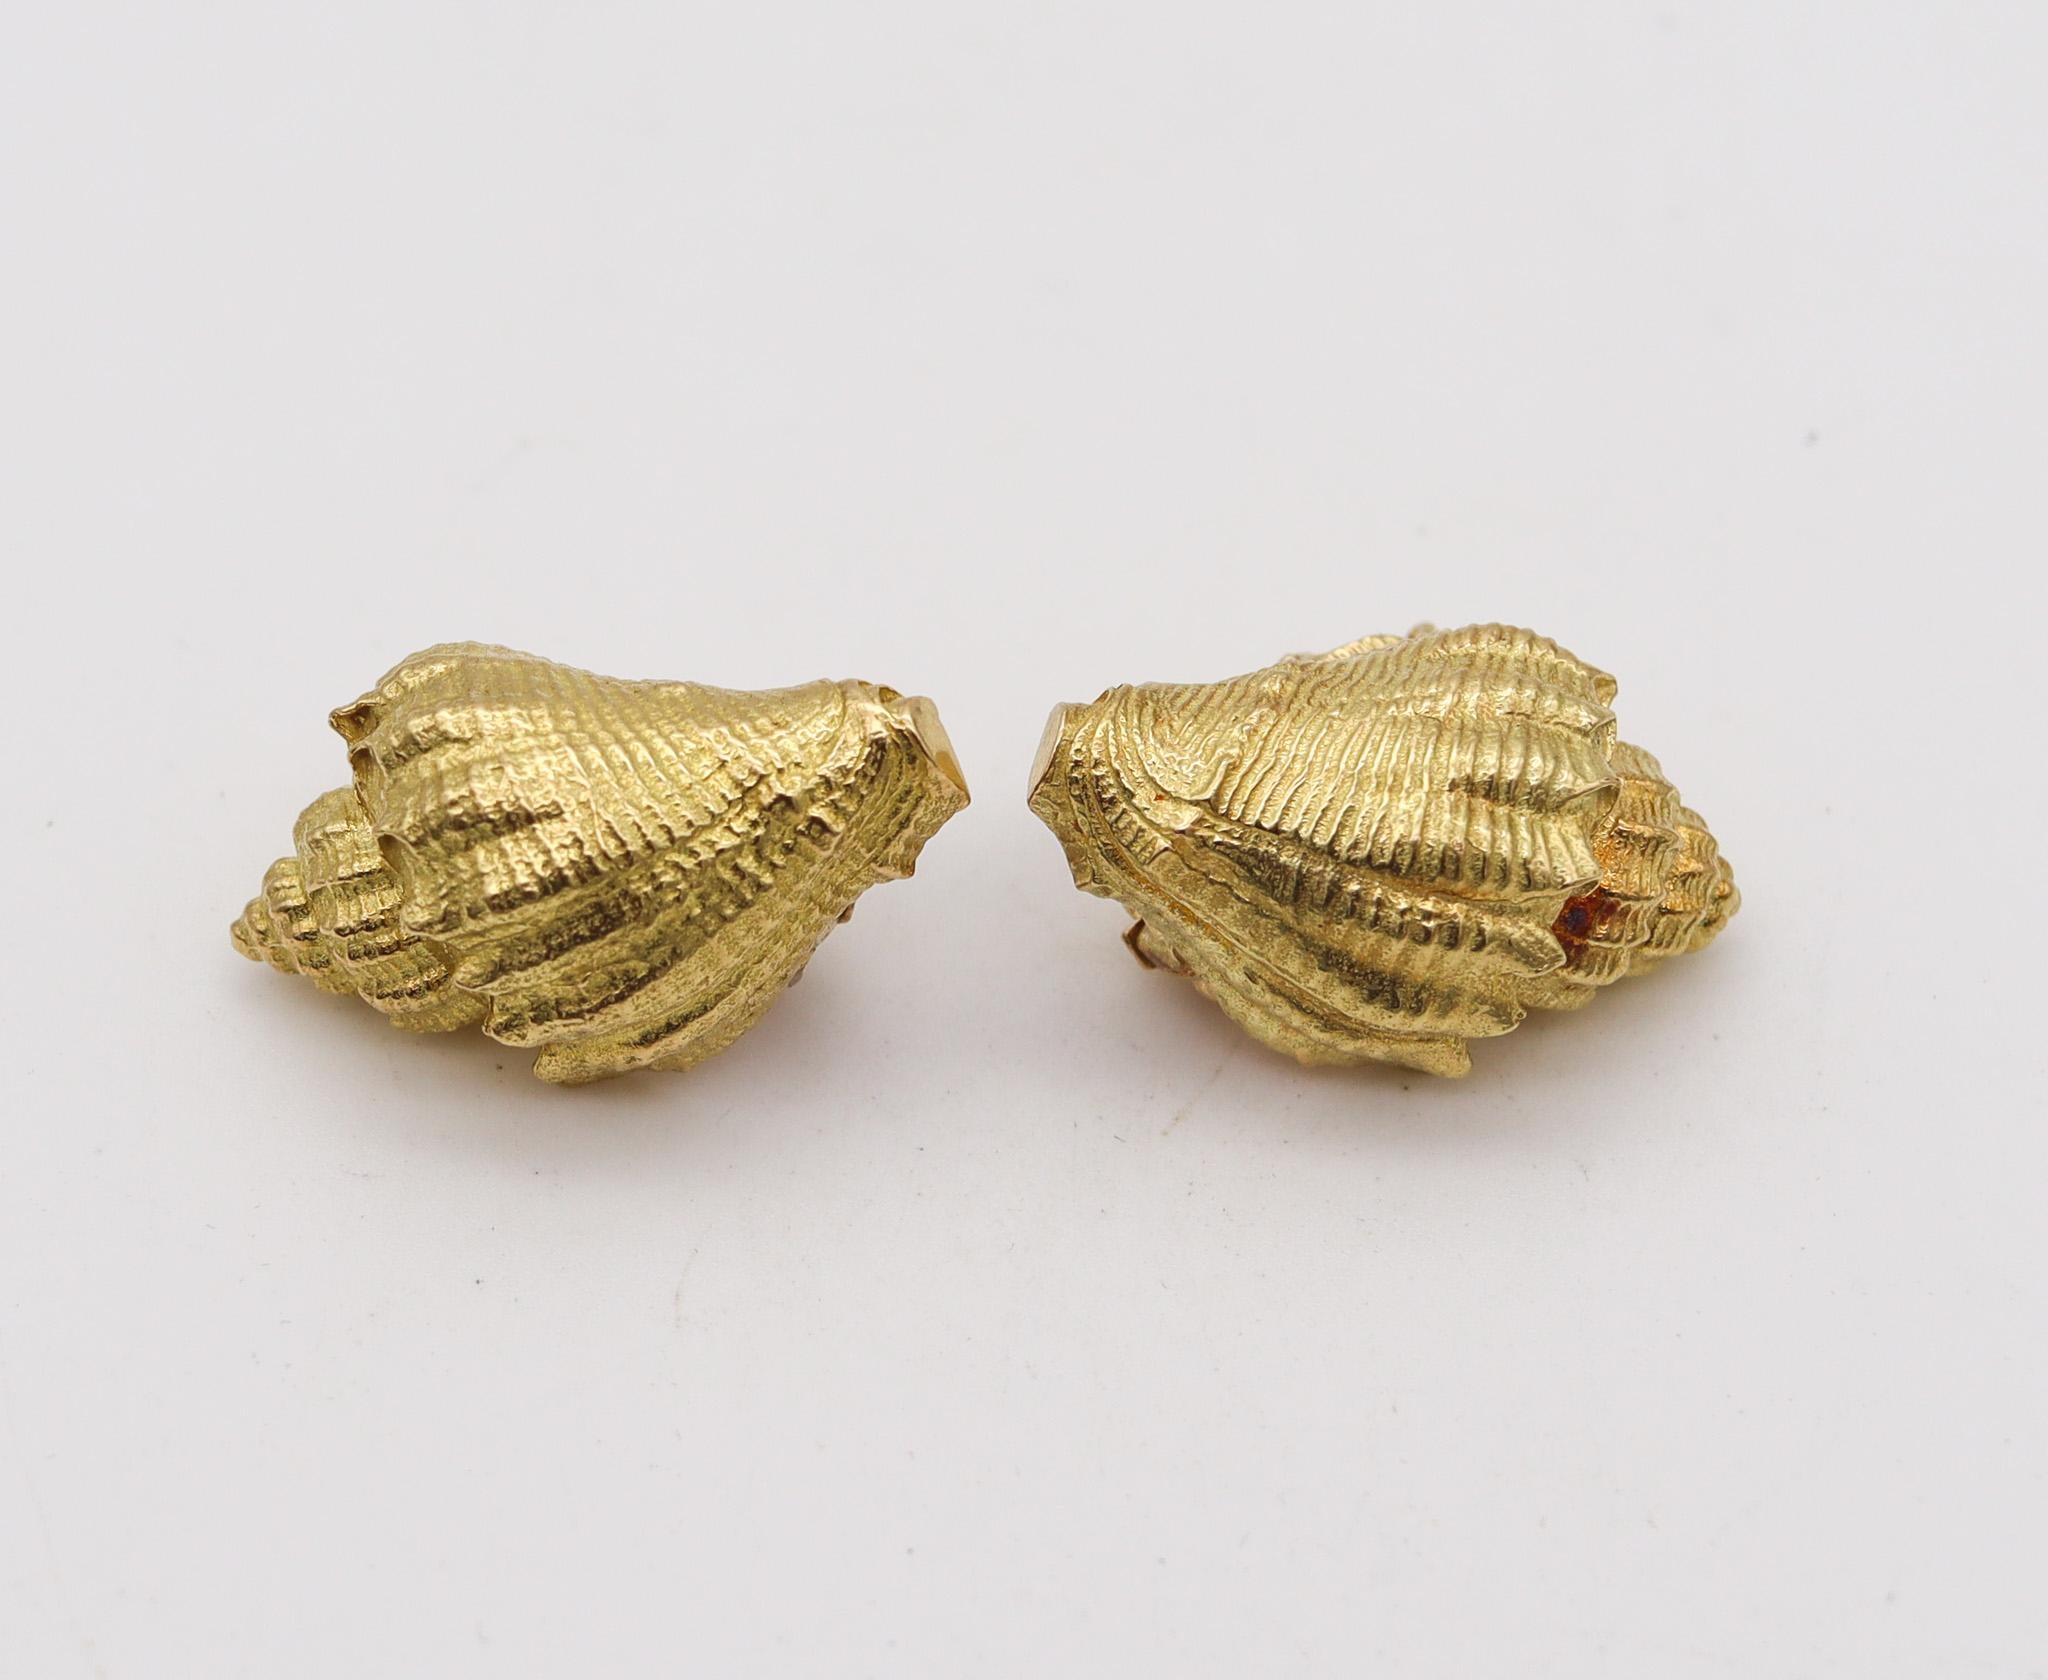 Modernist Tiffany & Co. 1970 George Schuler Seashells Clips Earrings In 18Kt Yellow Gold For Sale